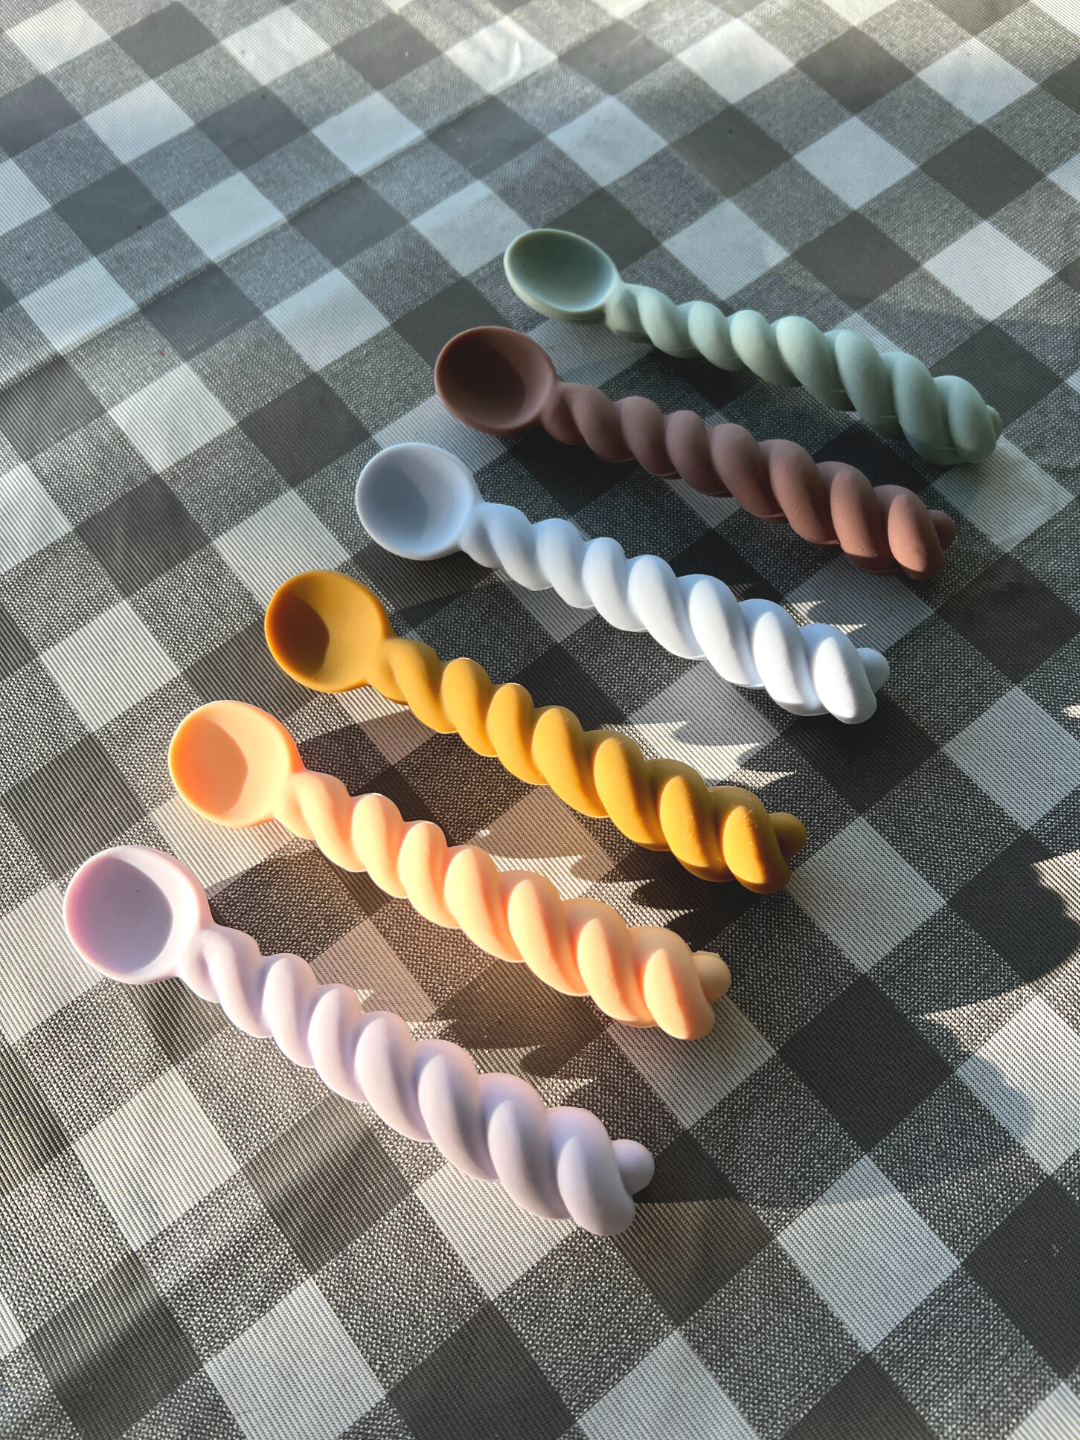 Lavender / Vanilla / Light Rubber | Six rubber kids spoons laid on tablecloth